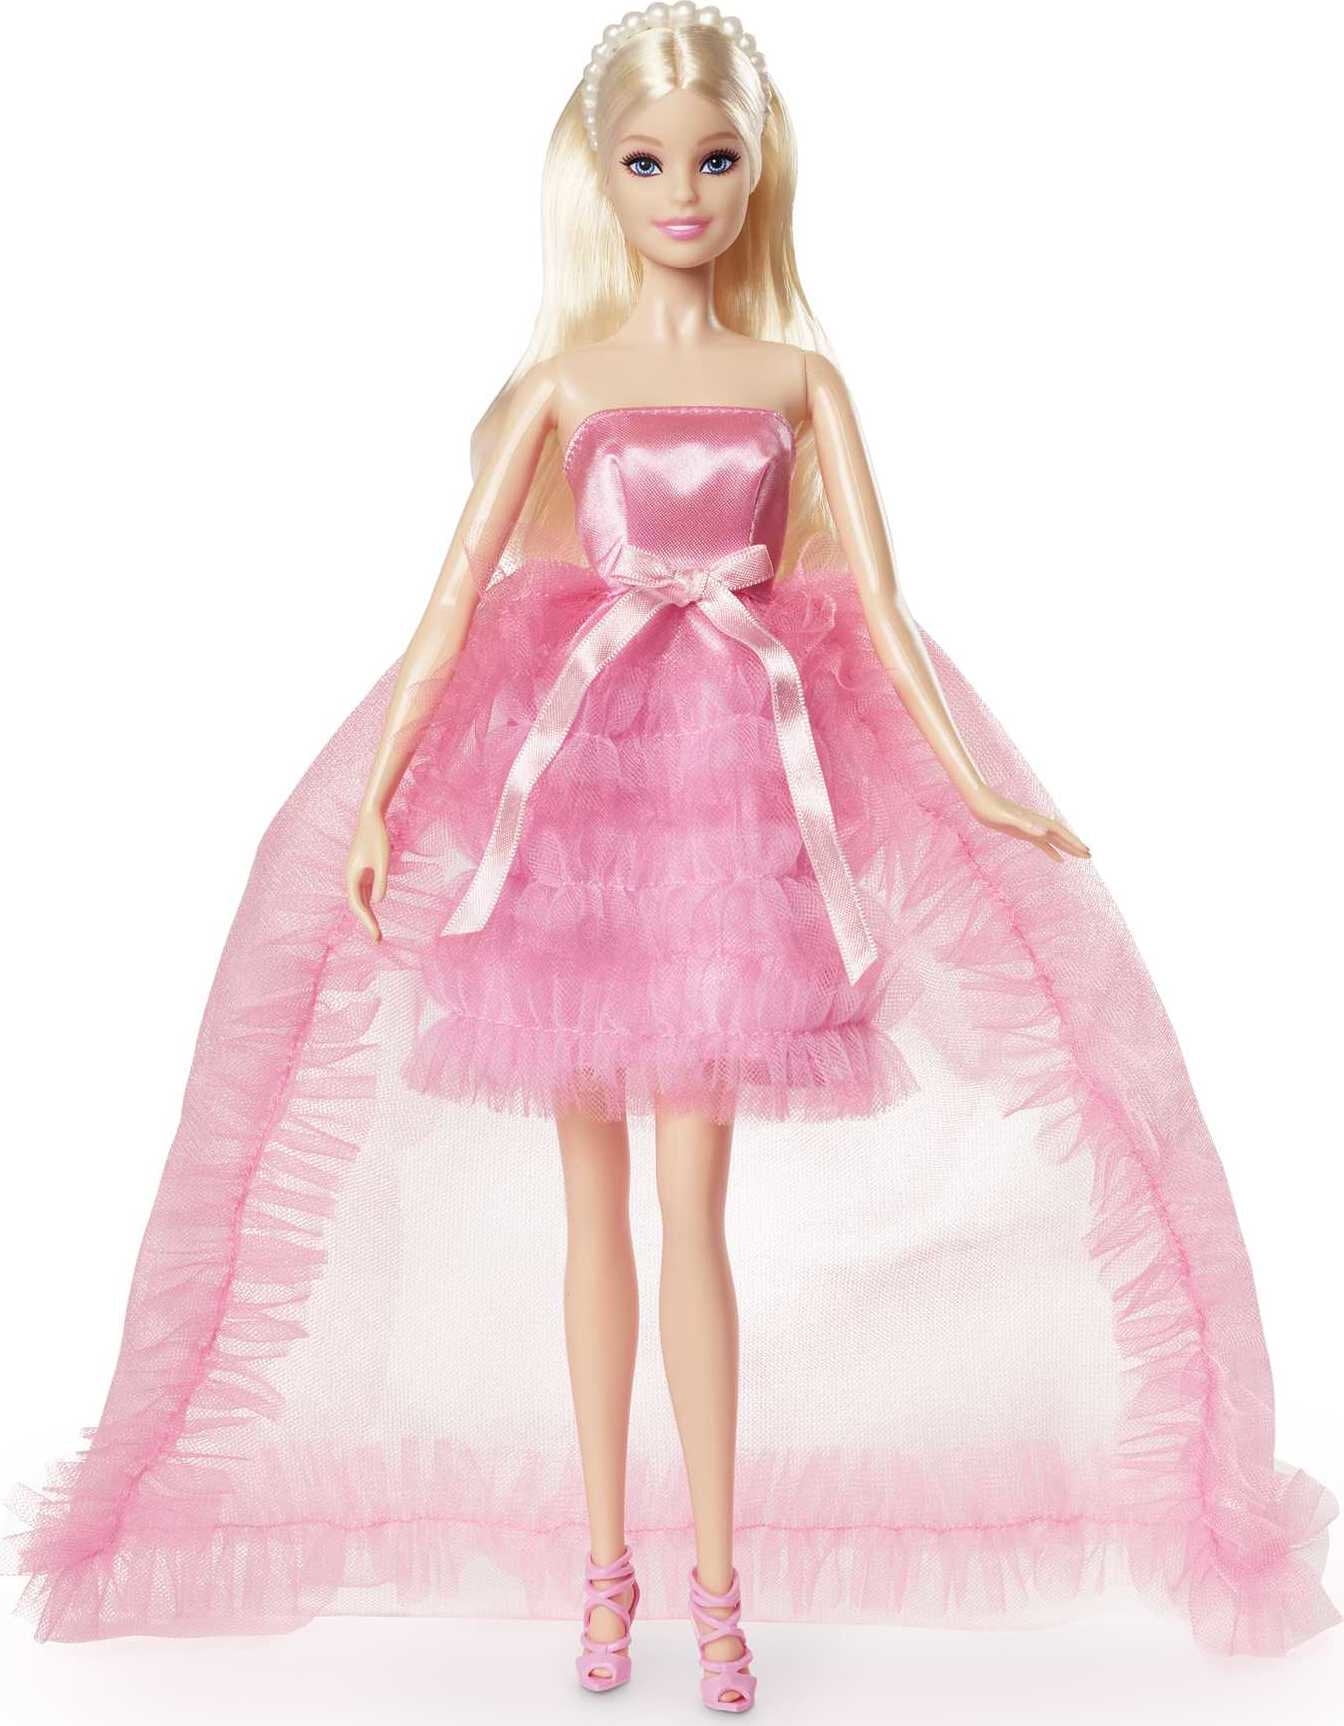 Barbie Doll, Birthday Wishes, Giftable, Blonde in Pink Dress - Walmart.com